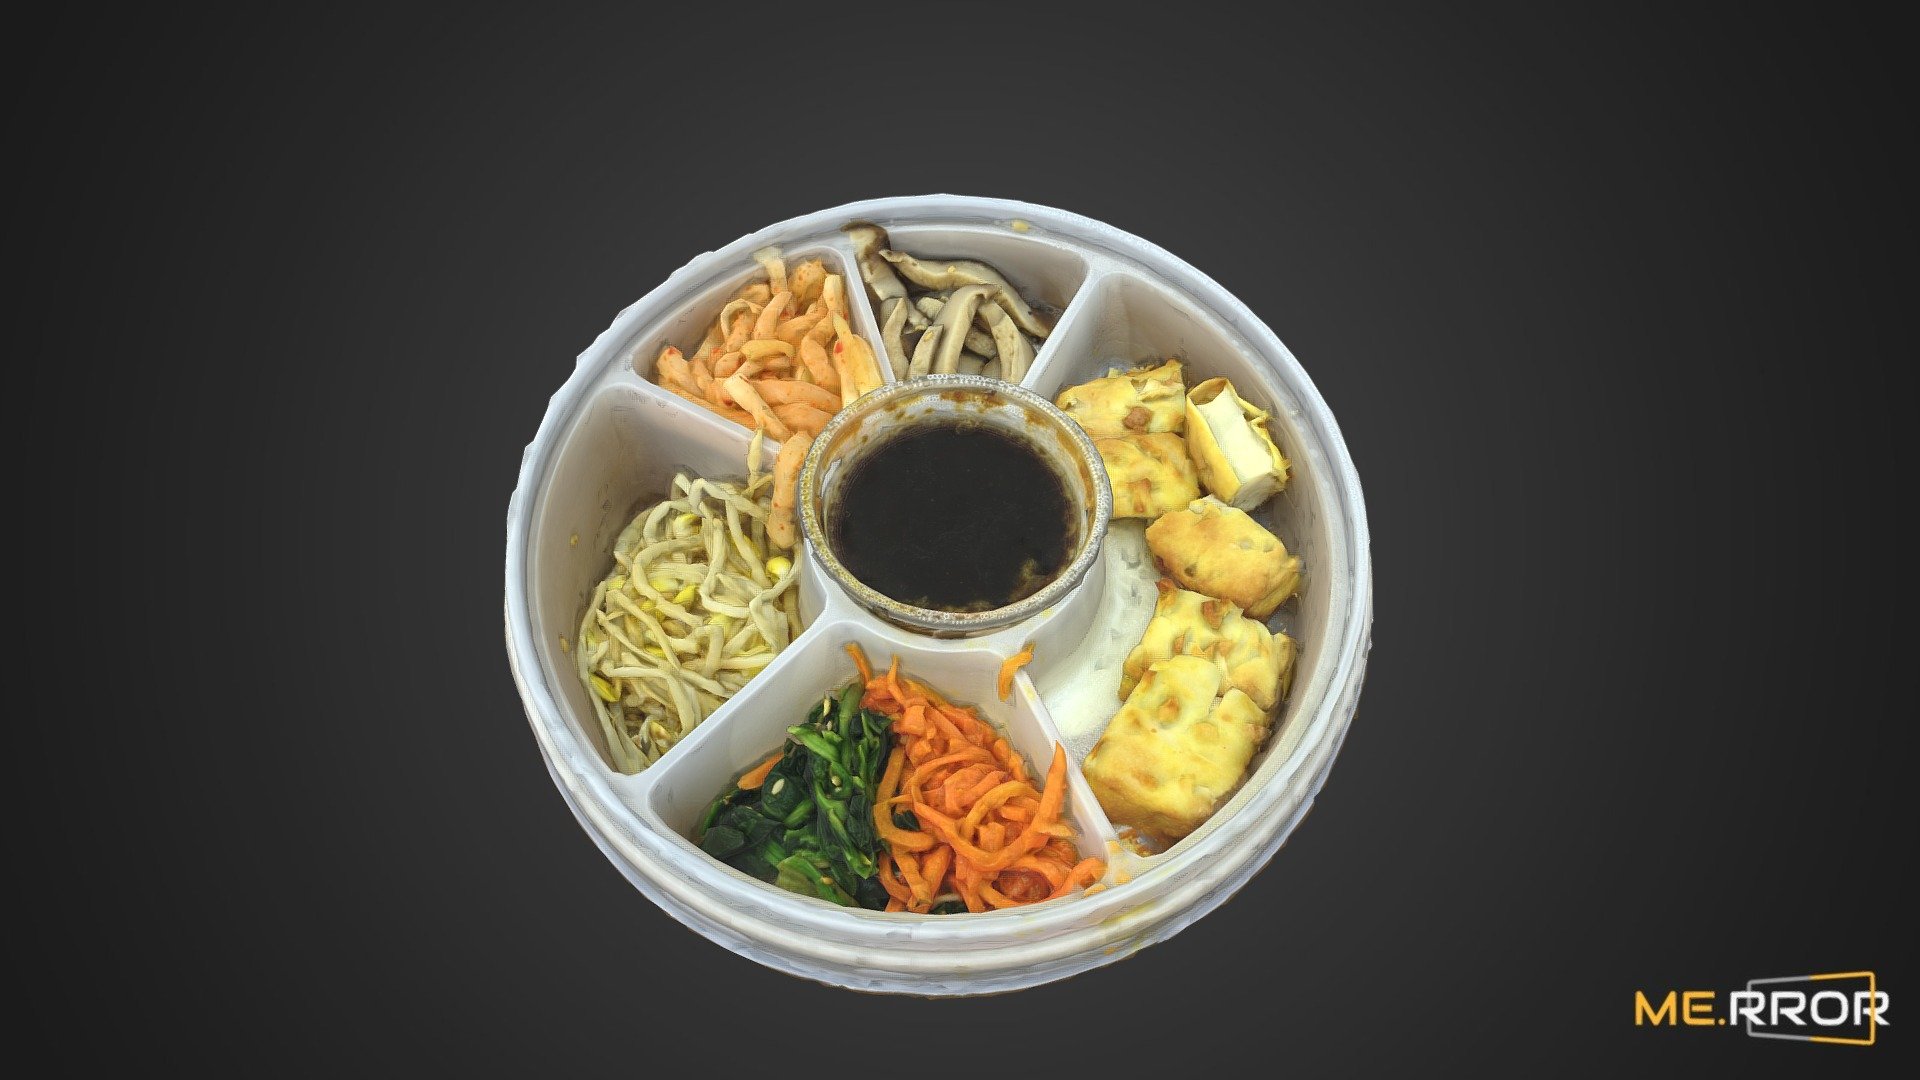 MERROR is a 3D Content PLATFORM which introduces various Asian assets to the 3D world

#3DScanning #Photogrametry #ME.RROR - Bibimbap Korean Mixed Rice - Buy Royalty Free 3D model by ME.RROR Studio (@merror) 3d model